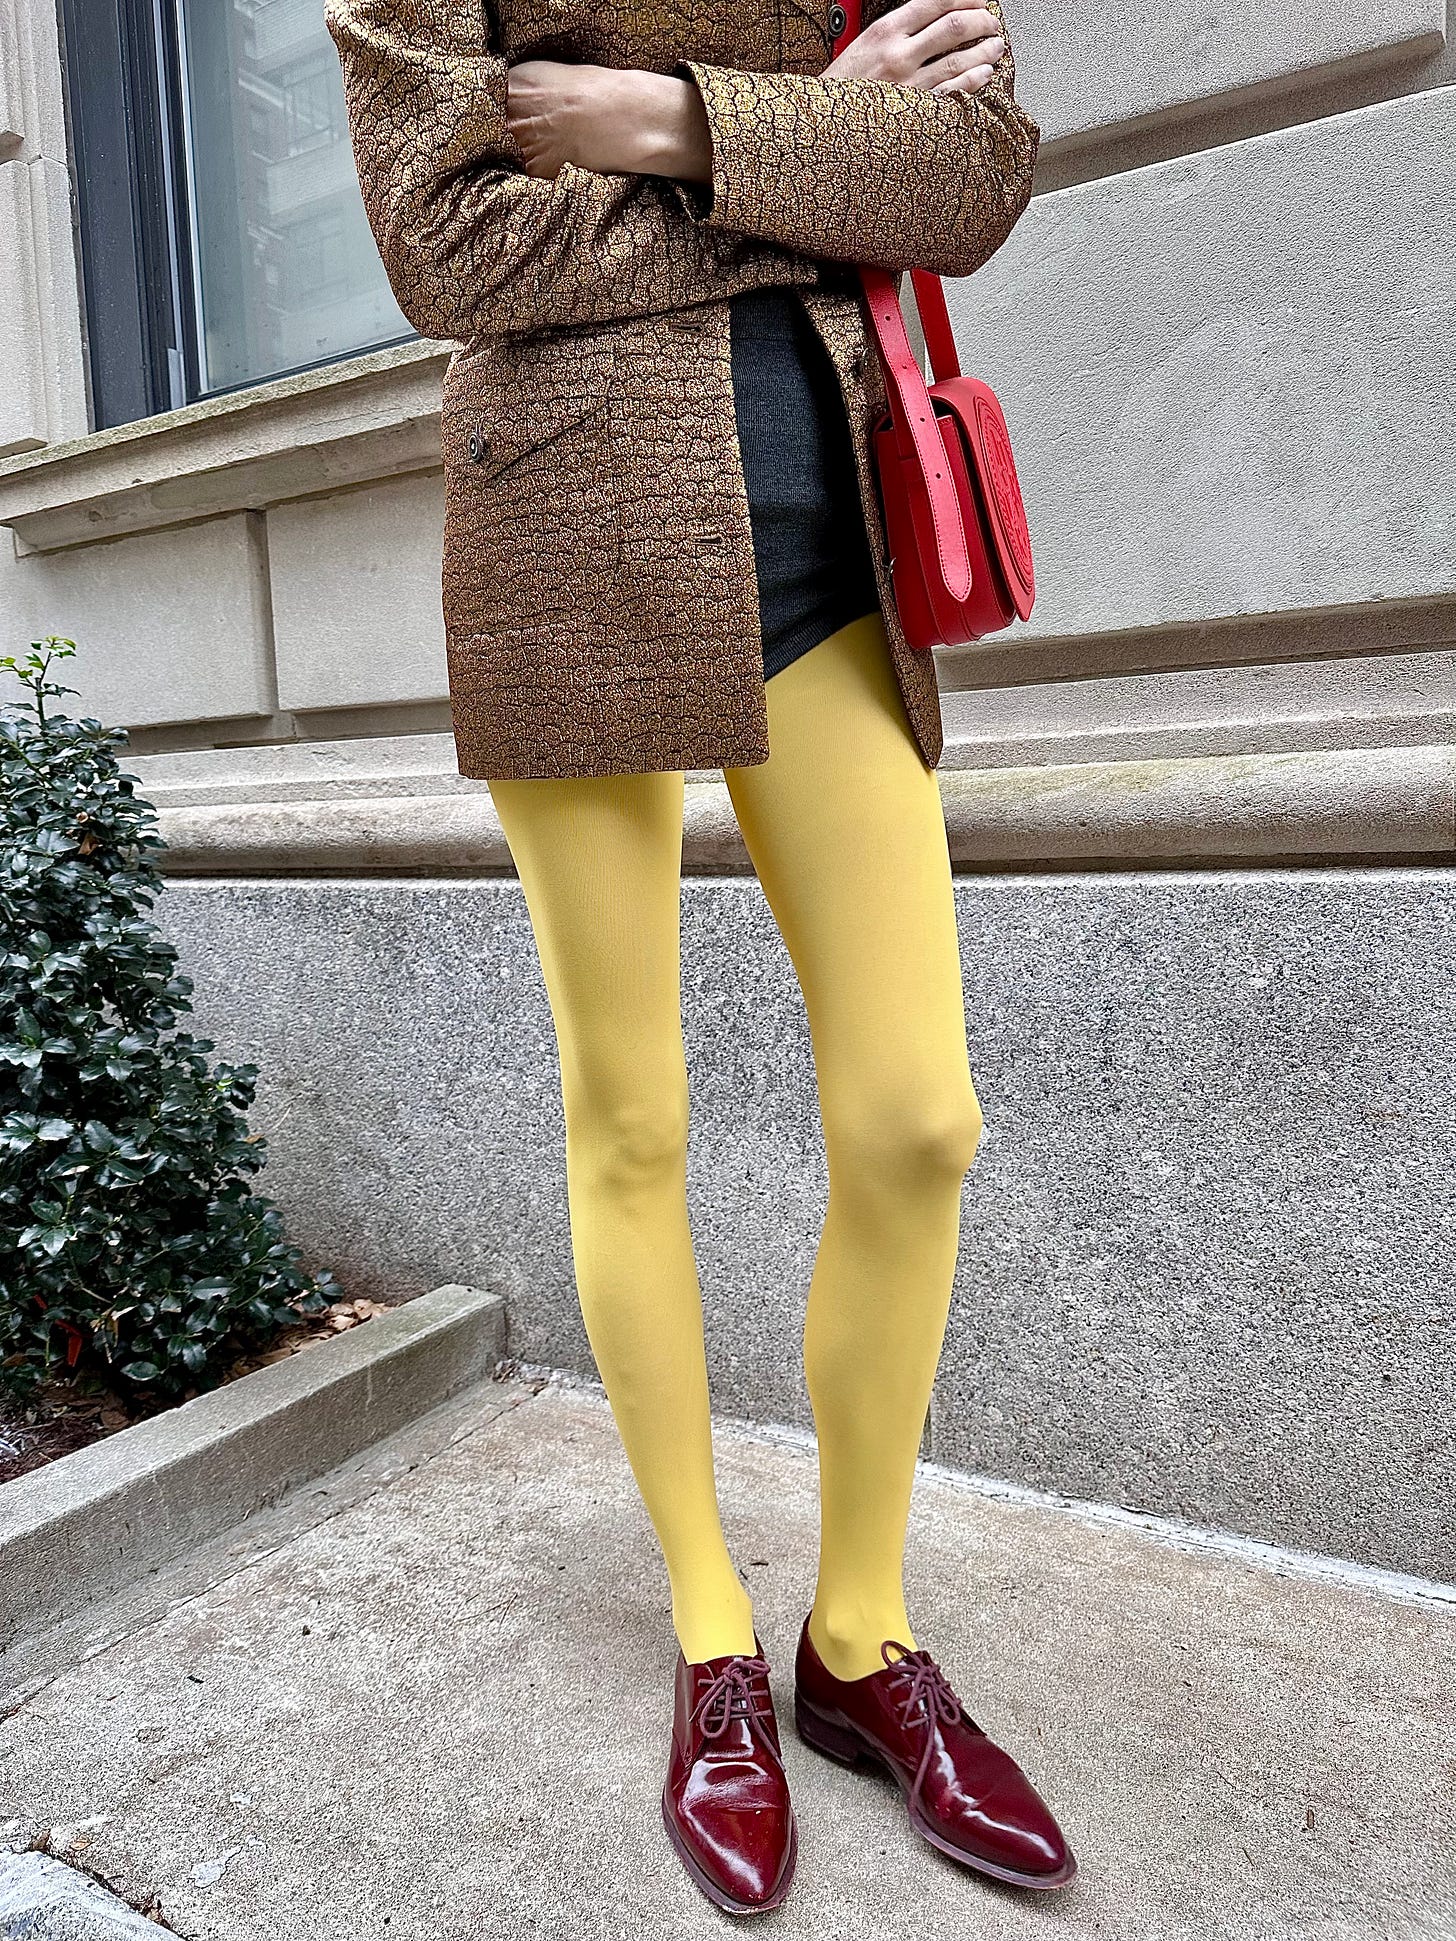 Andrea Everyday // A Fashion and Lifestyle Blog: how to wear: colored tights